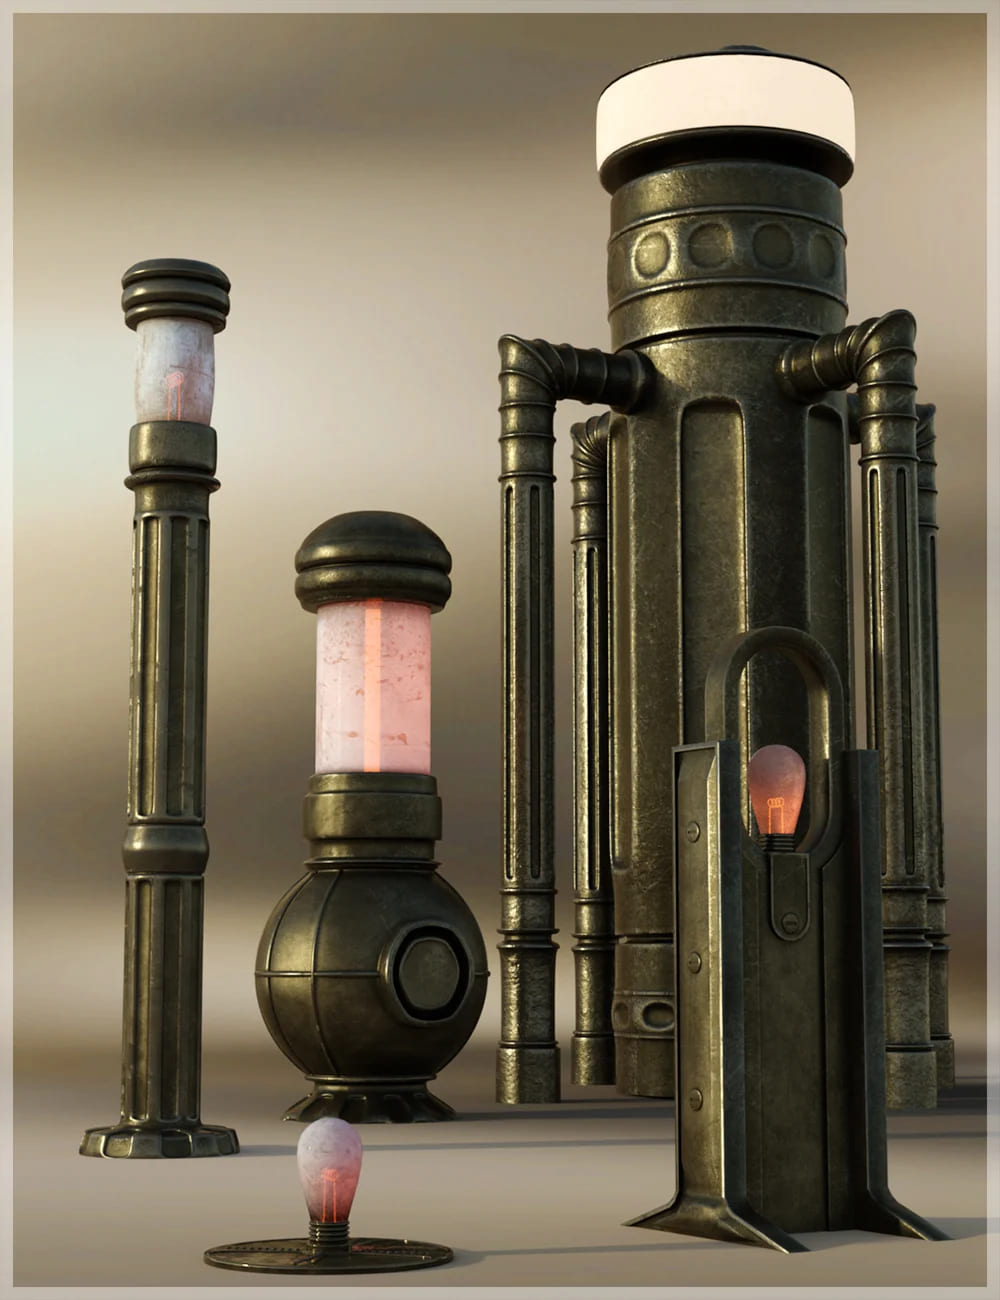 ND Steamy Deco: The Lamps_DAZ3DDL